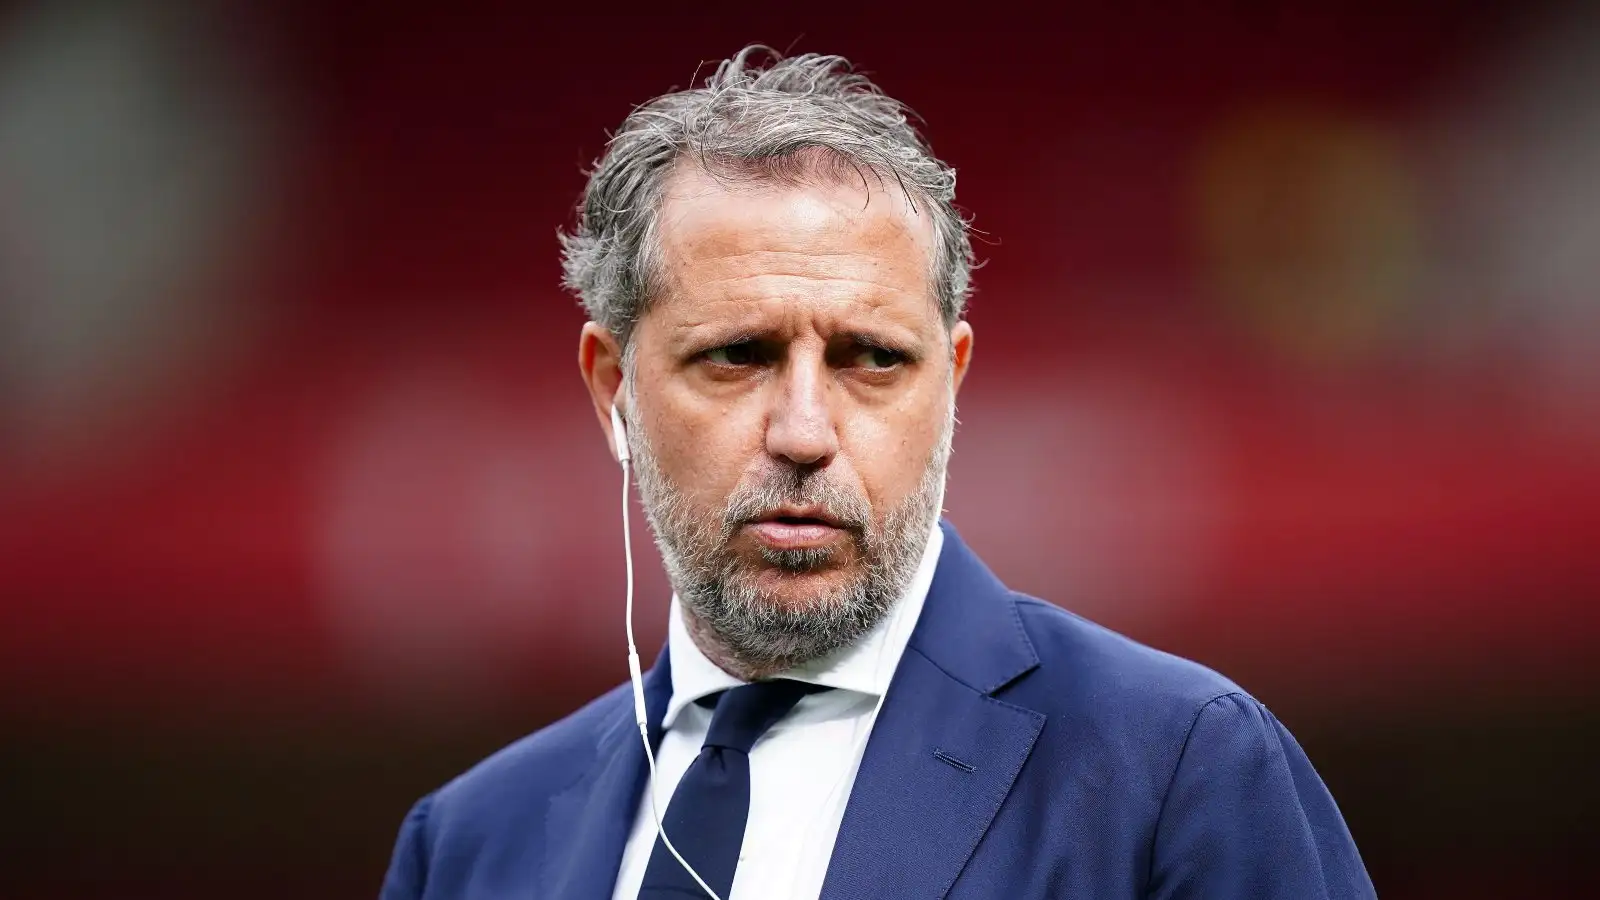 Tottenham transfer: Paratici to exact ‘great revenge’ using Man Utd target after he was ‘burned at stake’